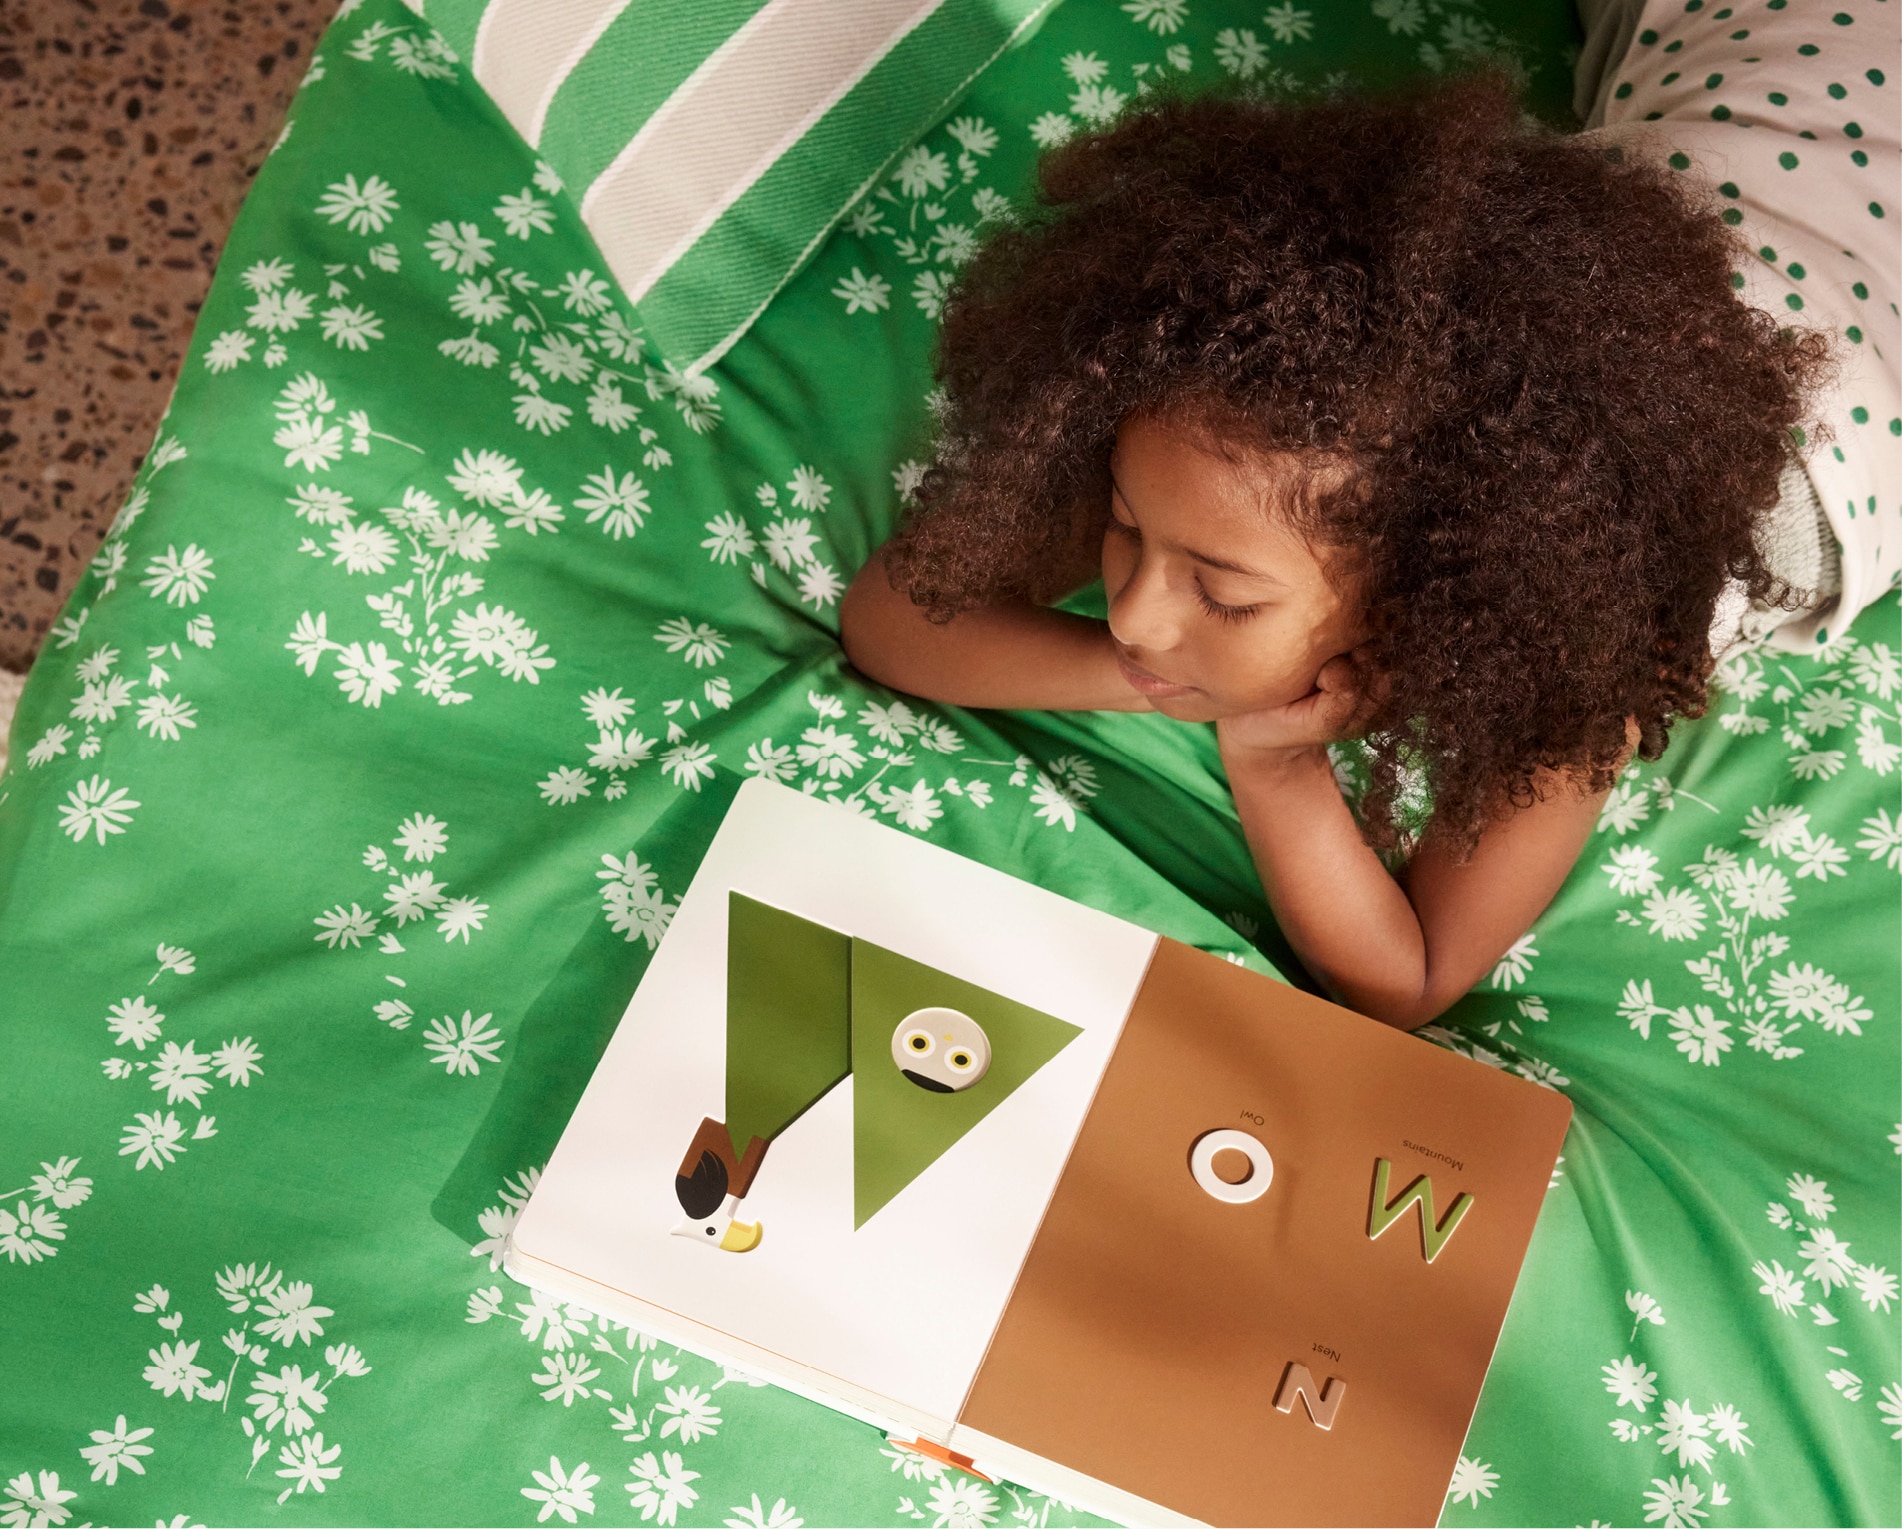 young brown skinned girl with tight, brown curly hair lies on her stomach, propped up on elbows. she is looking at a picture book open to mountains. the bed has green sheets with a white daisy print scattered across it.